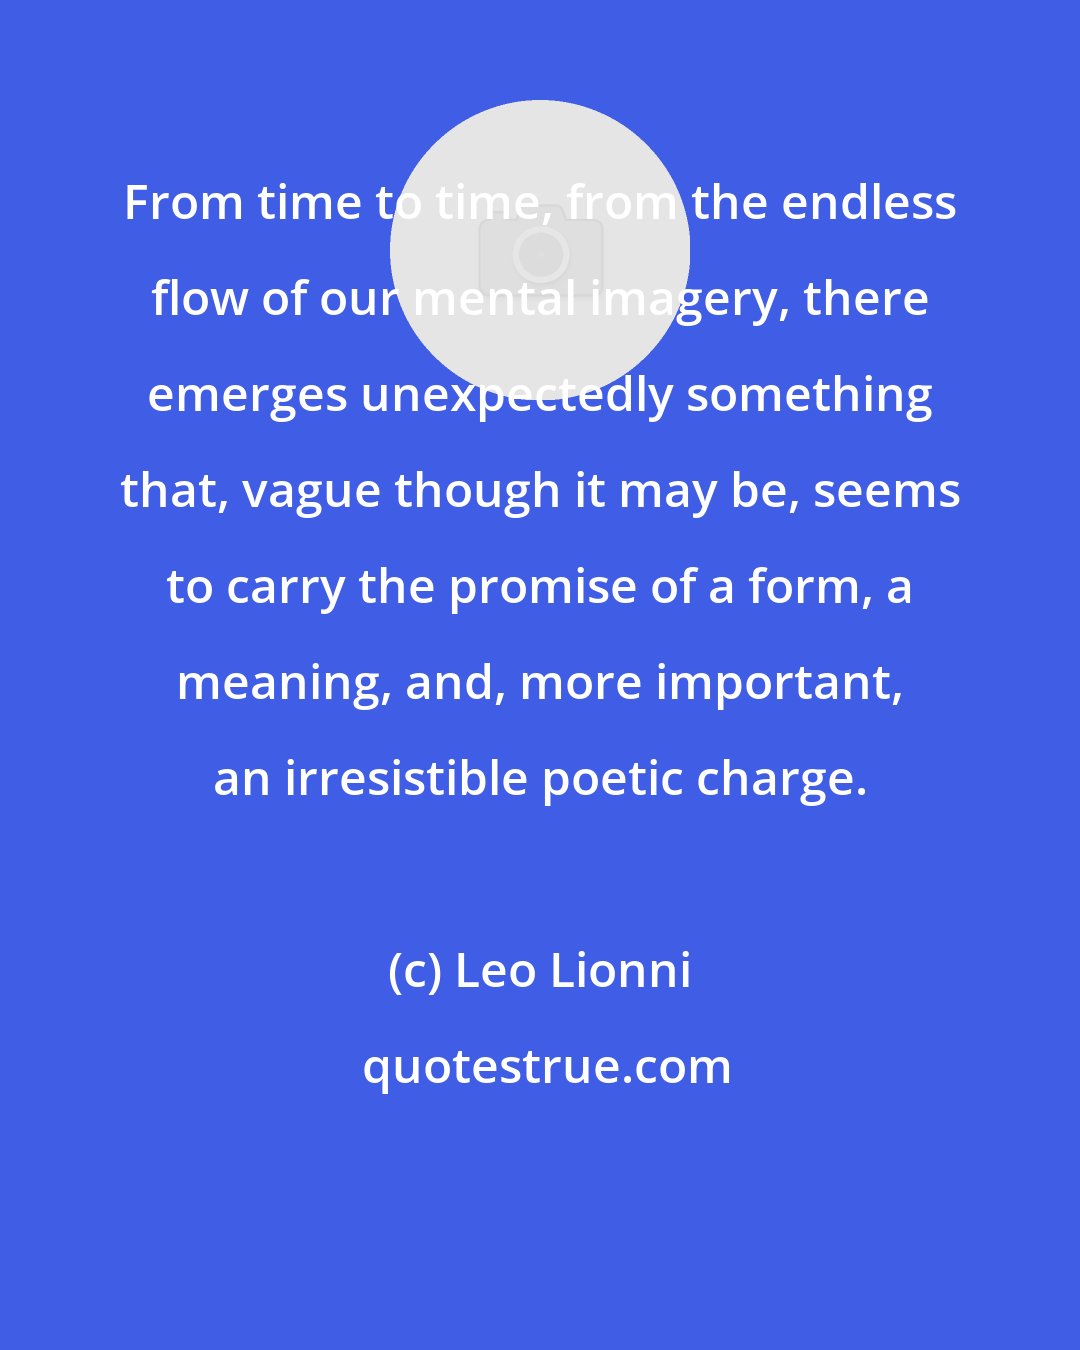 Leo Lionni: From time to time, from the endless flow of our mental imagery, there emerges unexpectedly something that, vague though it may be, seems to carry the promise of a form, a meaning, and, more important, an irresistible poetic charge.